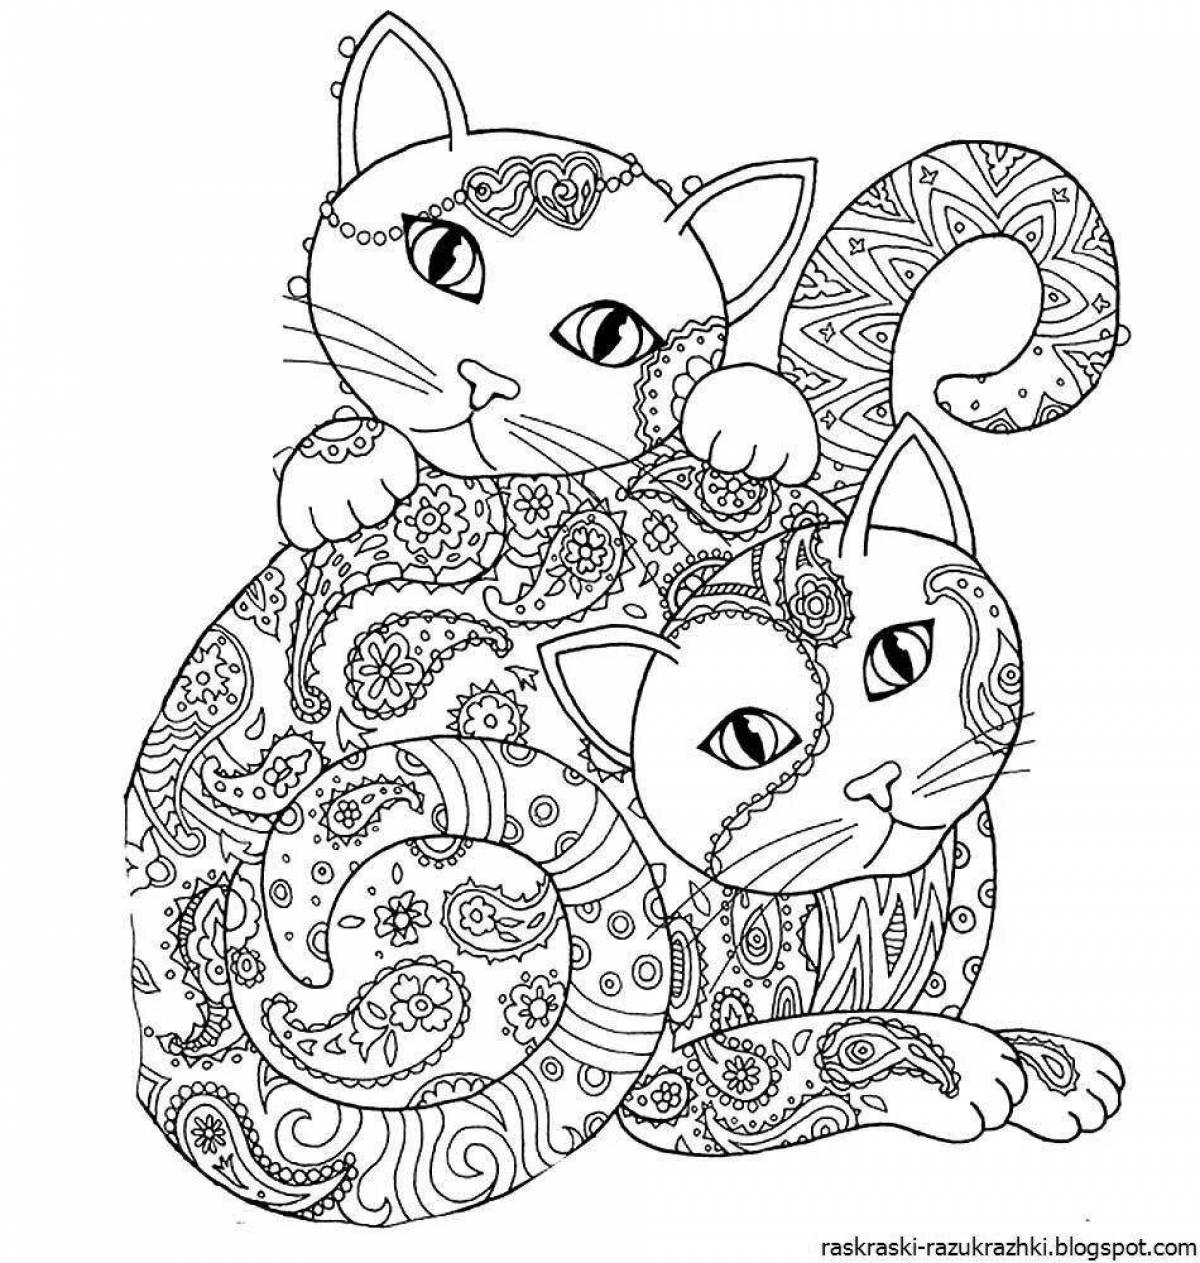 A fascinating anti-stress coloring book for children aged 10